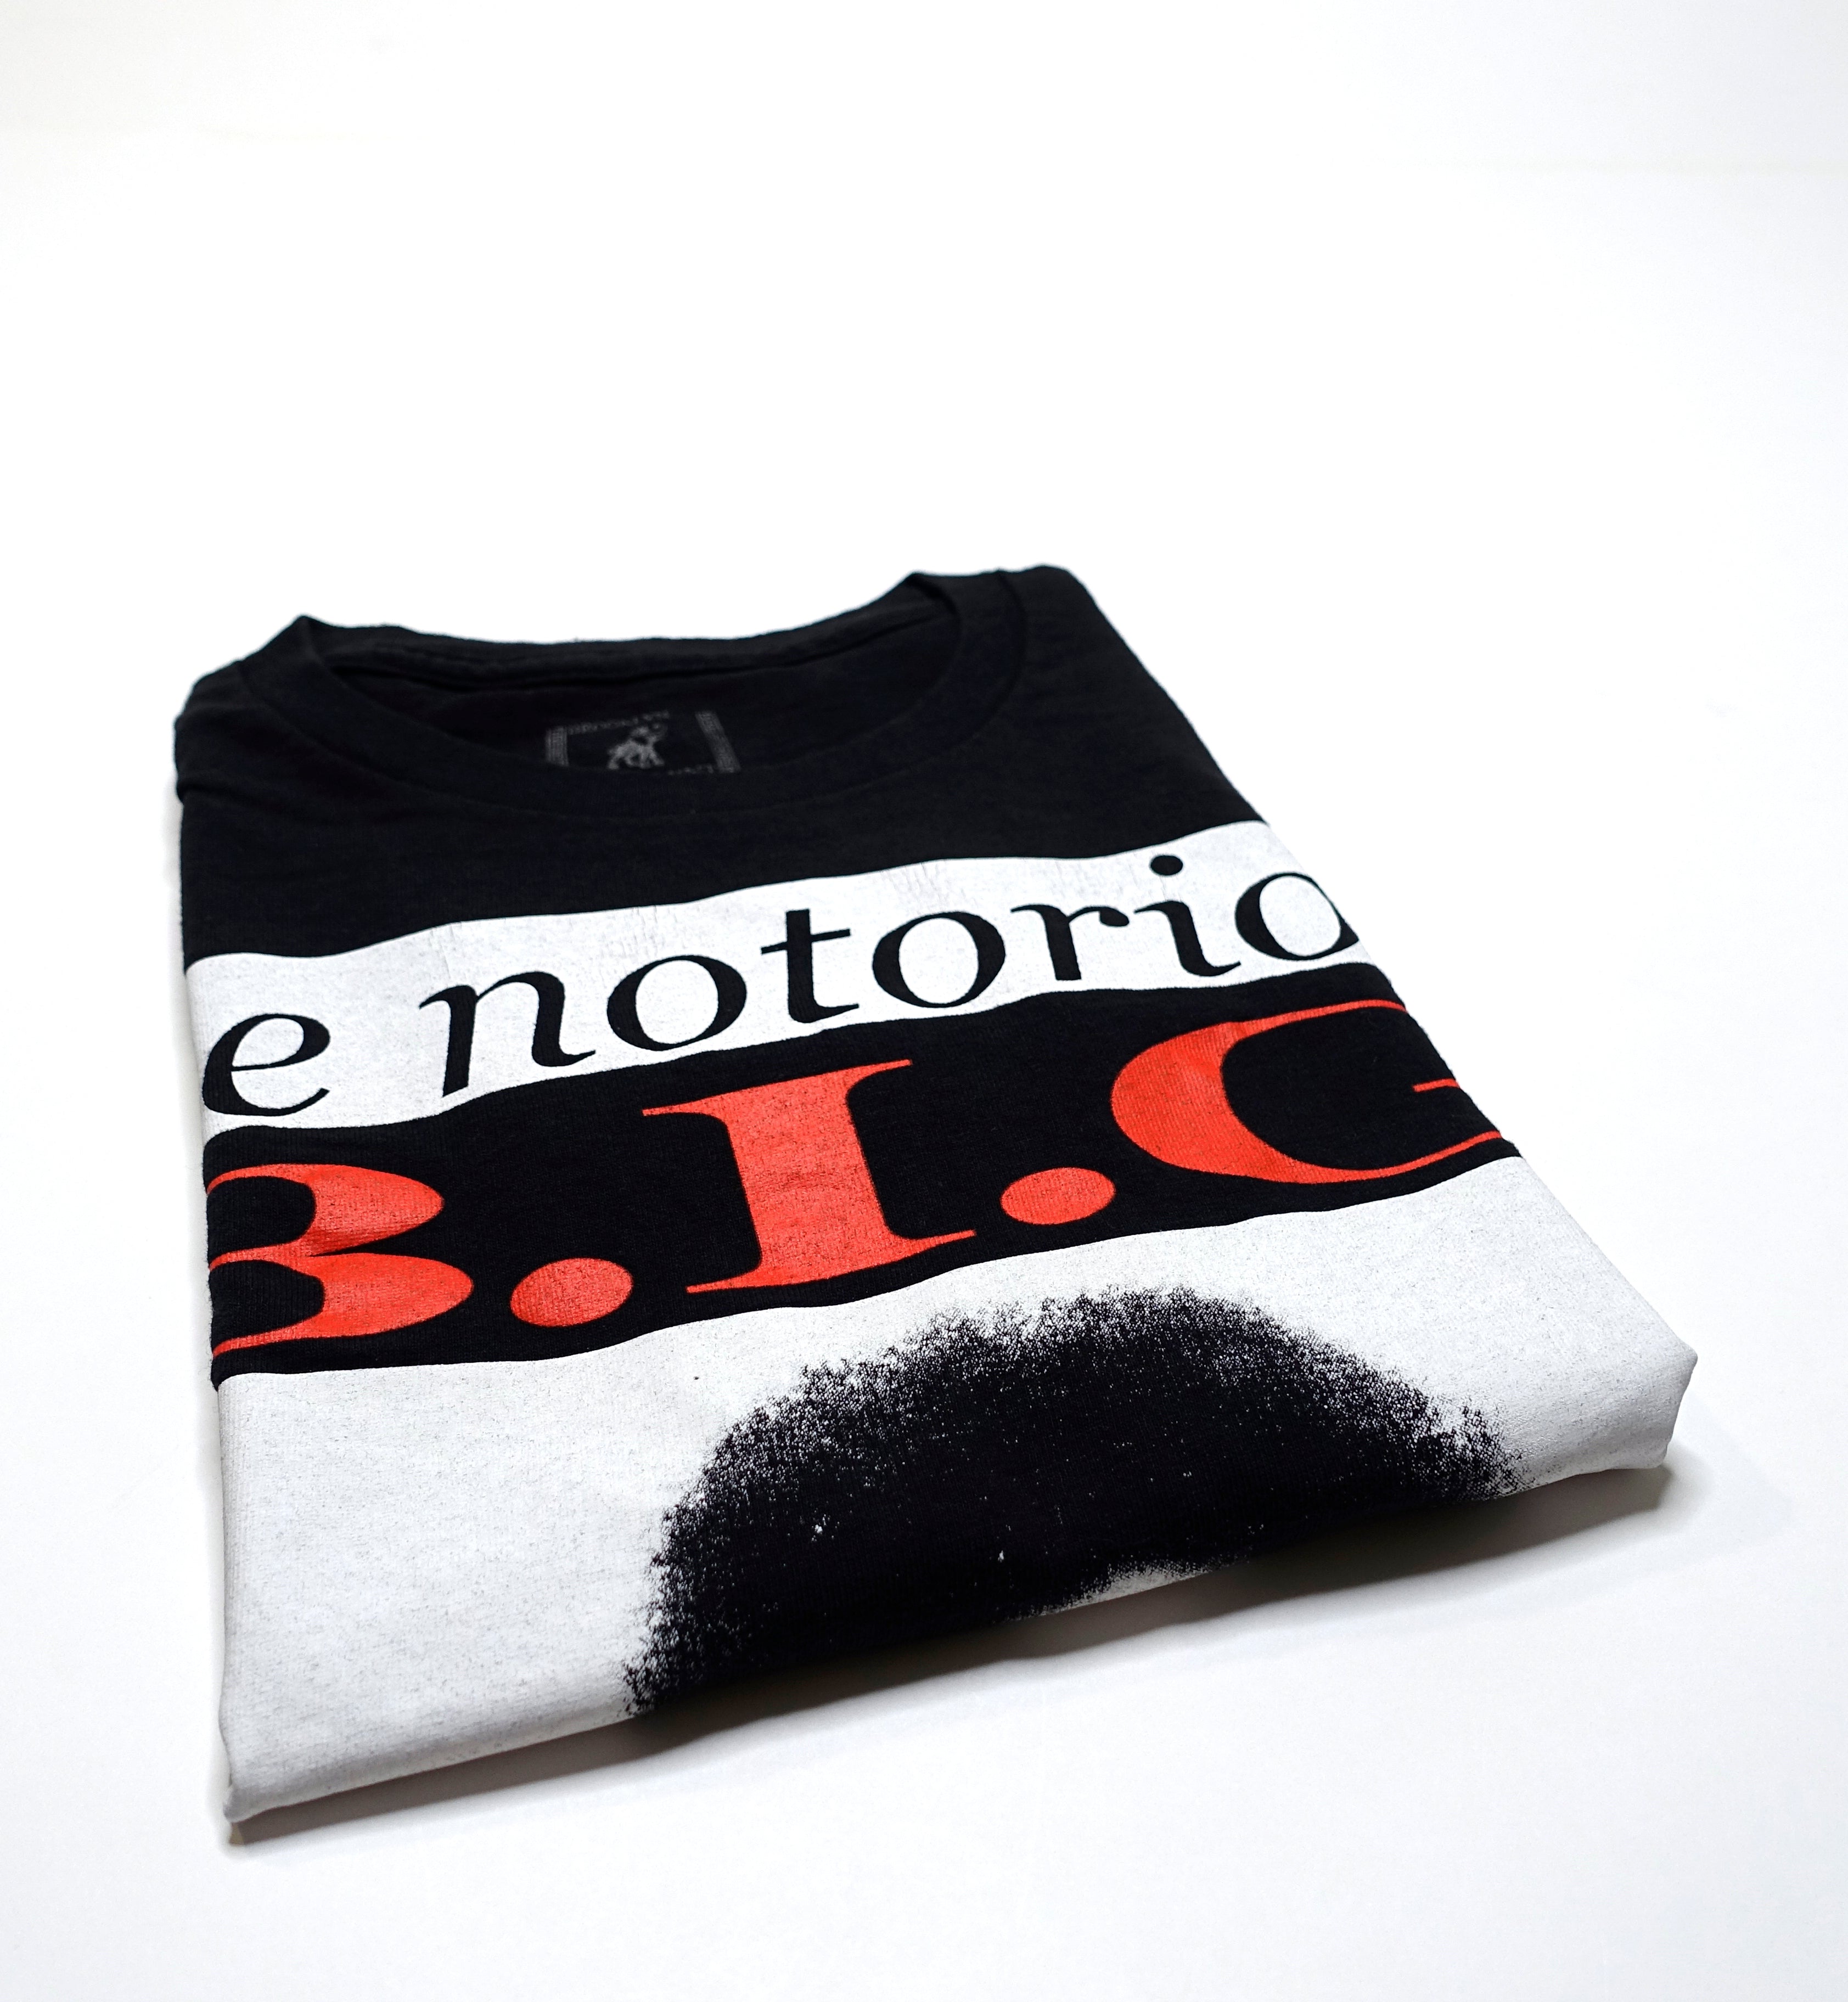 Notorious B.I.G - Ready To Die Shirt Size XL